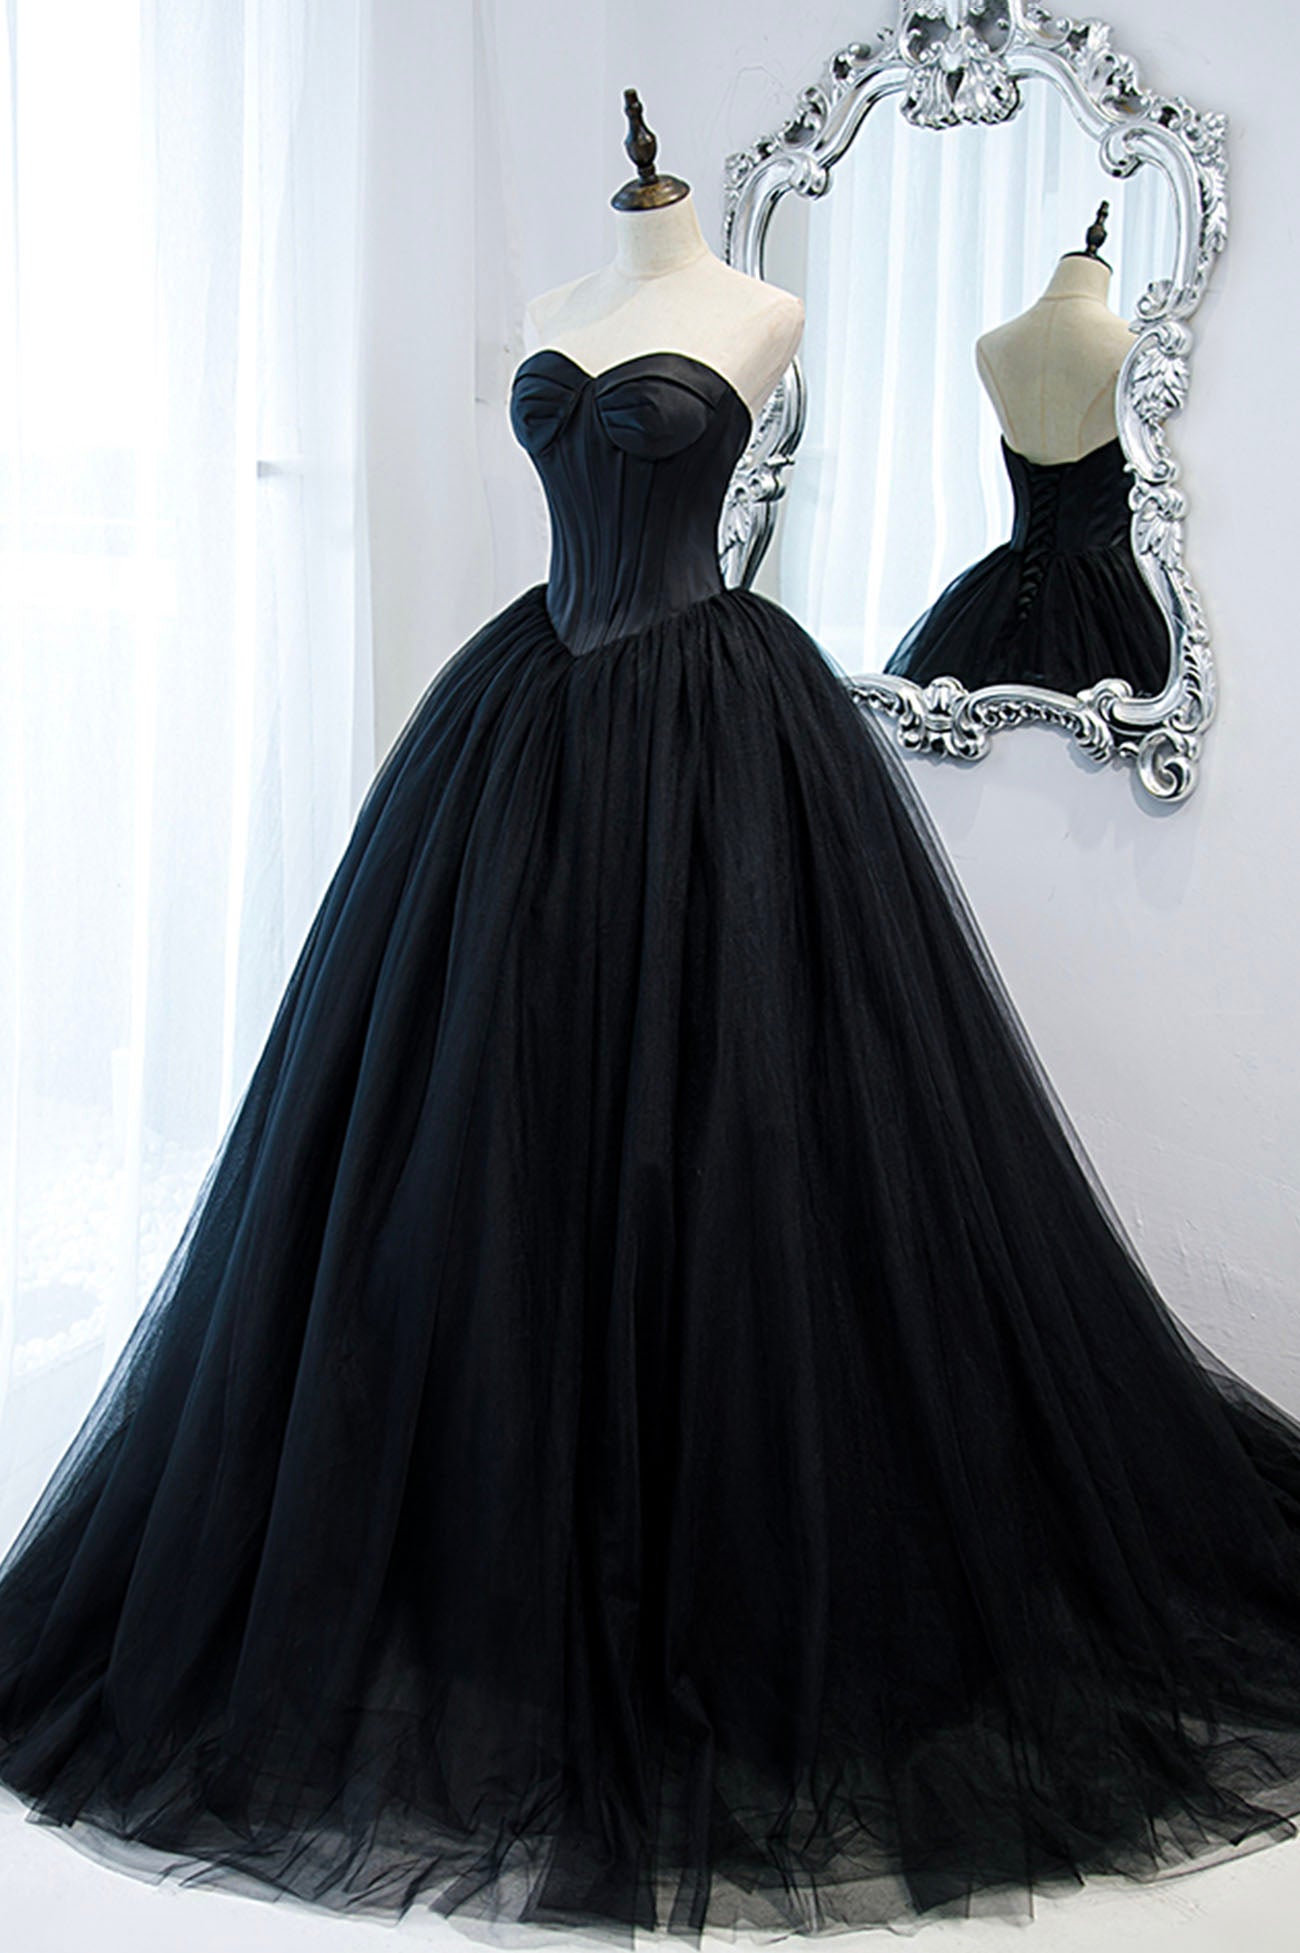 Black Strapless Tulle Long A-Line Corset Prom Dress, Black Corset Formal Evening Gown outfits, Party Dress Long Sleeve Mini